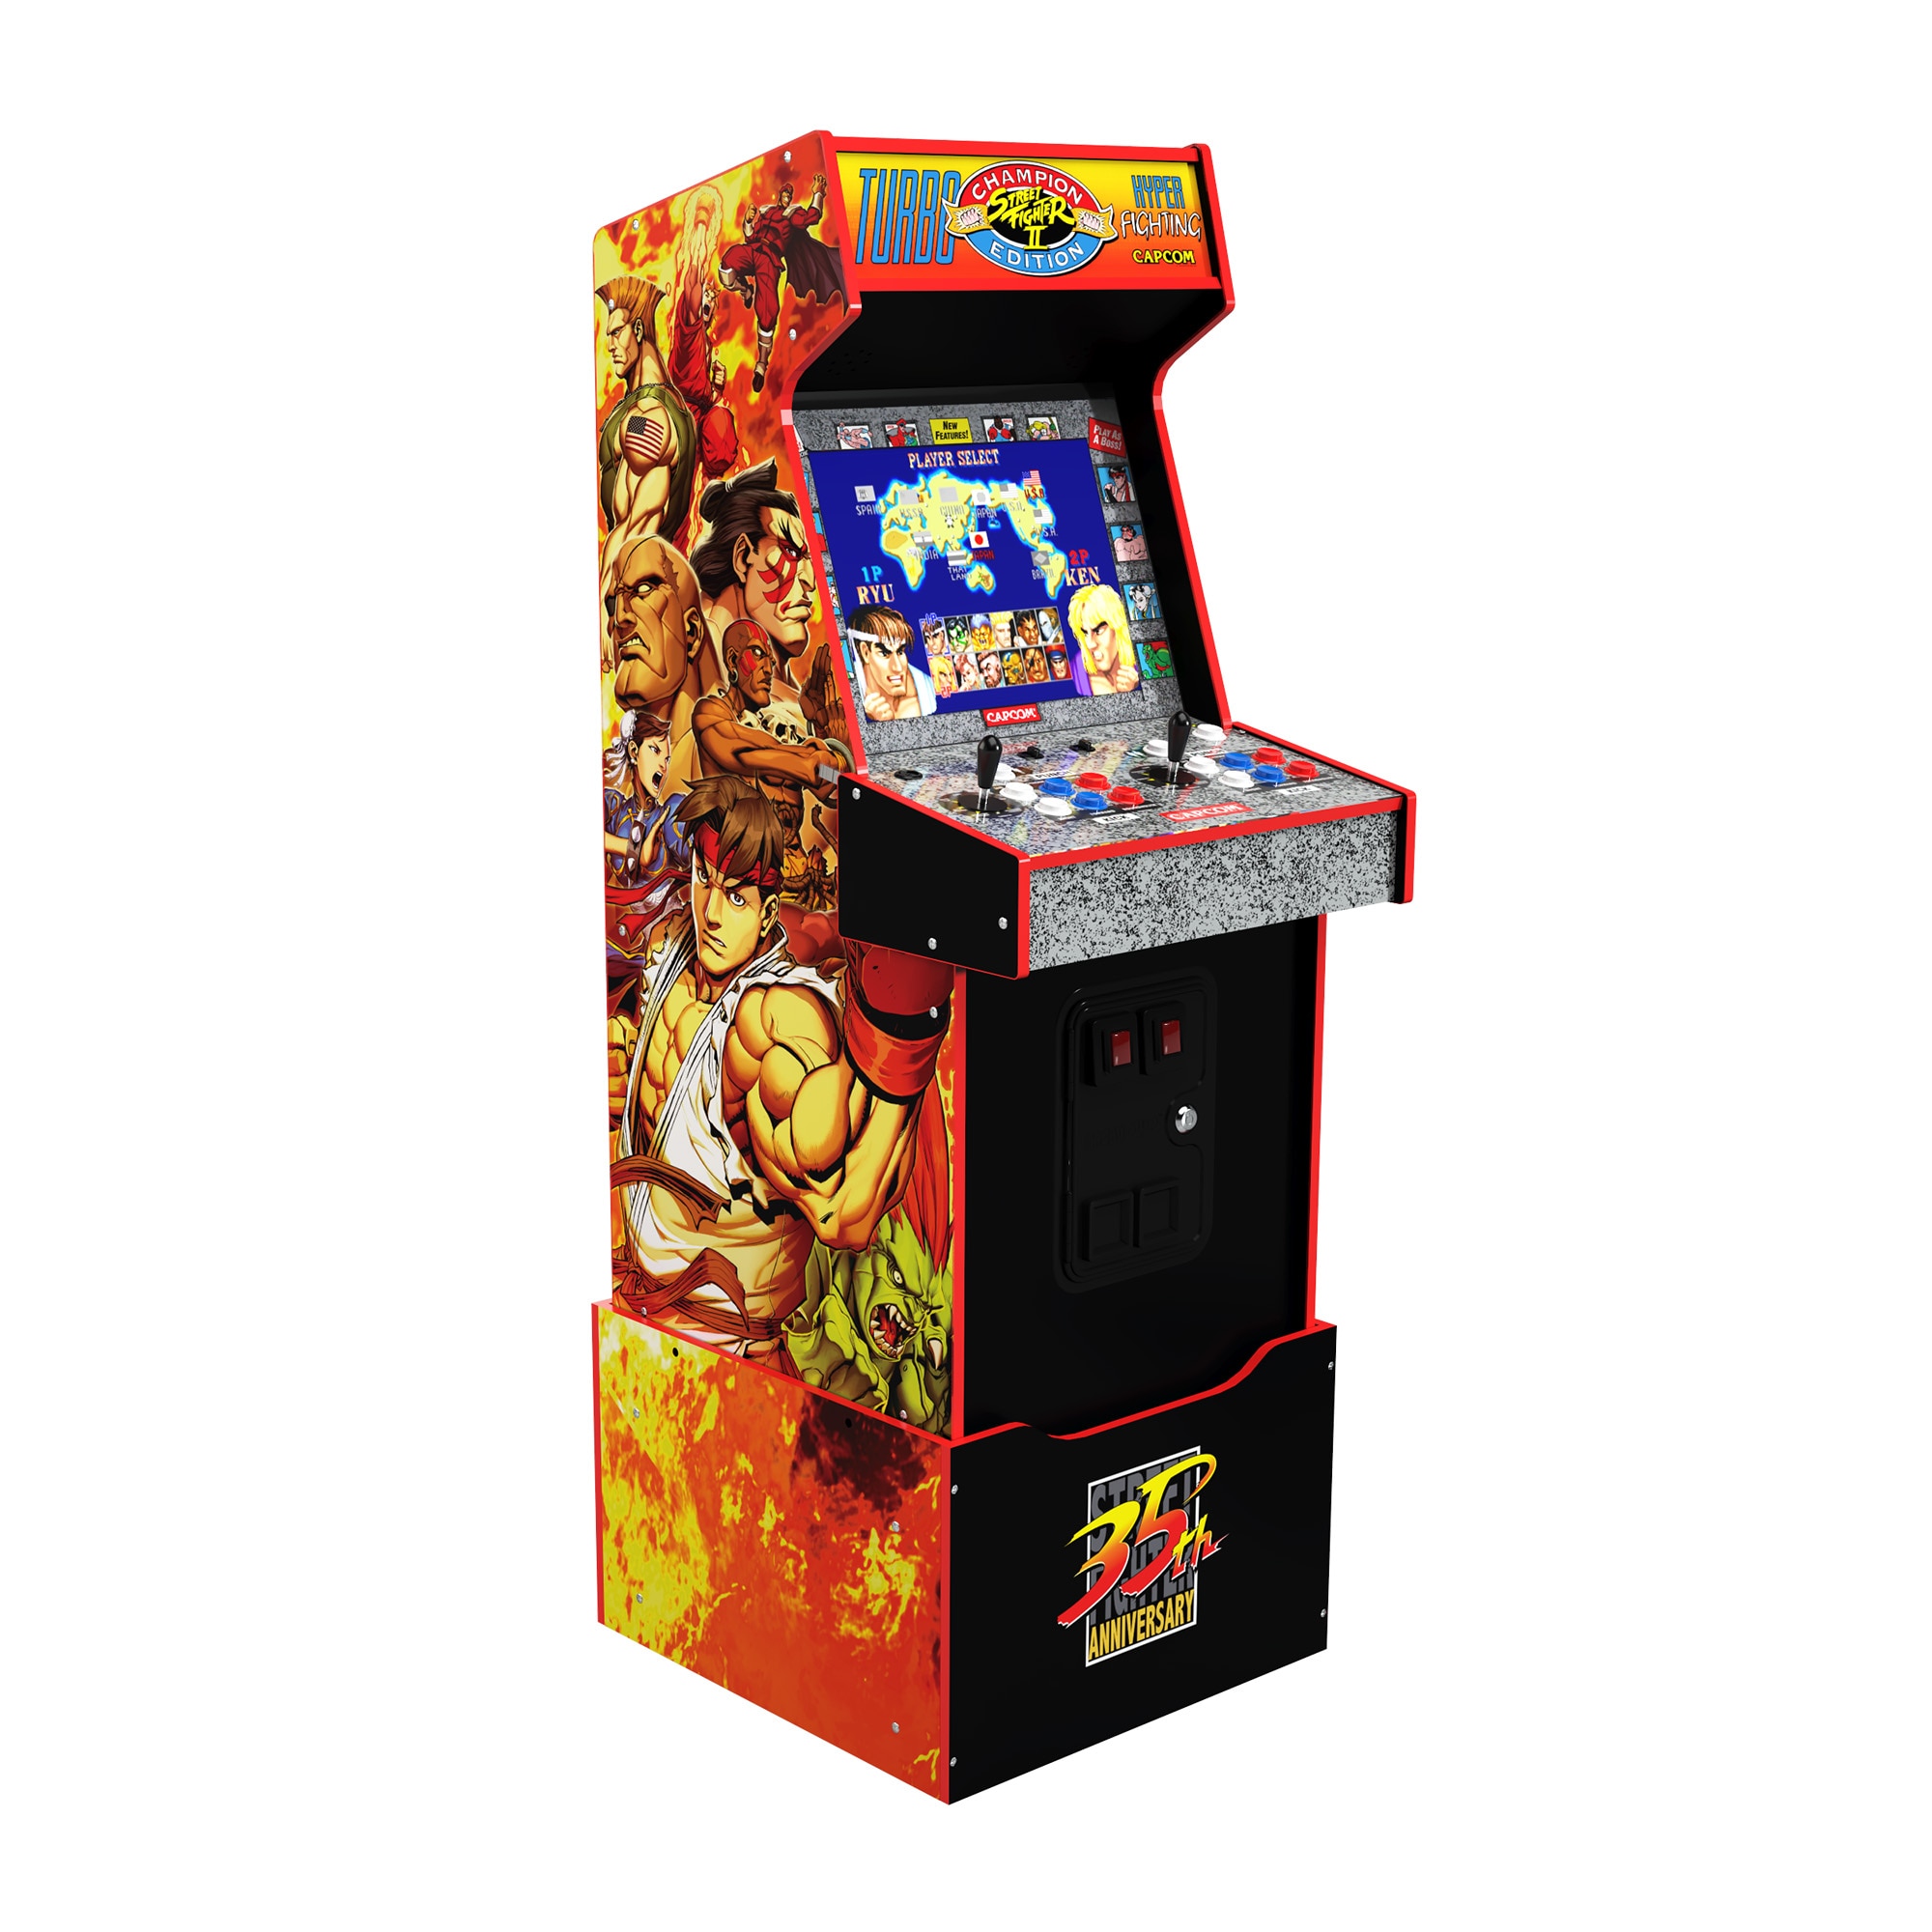 Arcade Basketball Game 2-Player Electronic Sports - Auz Sales Online